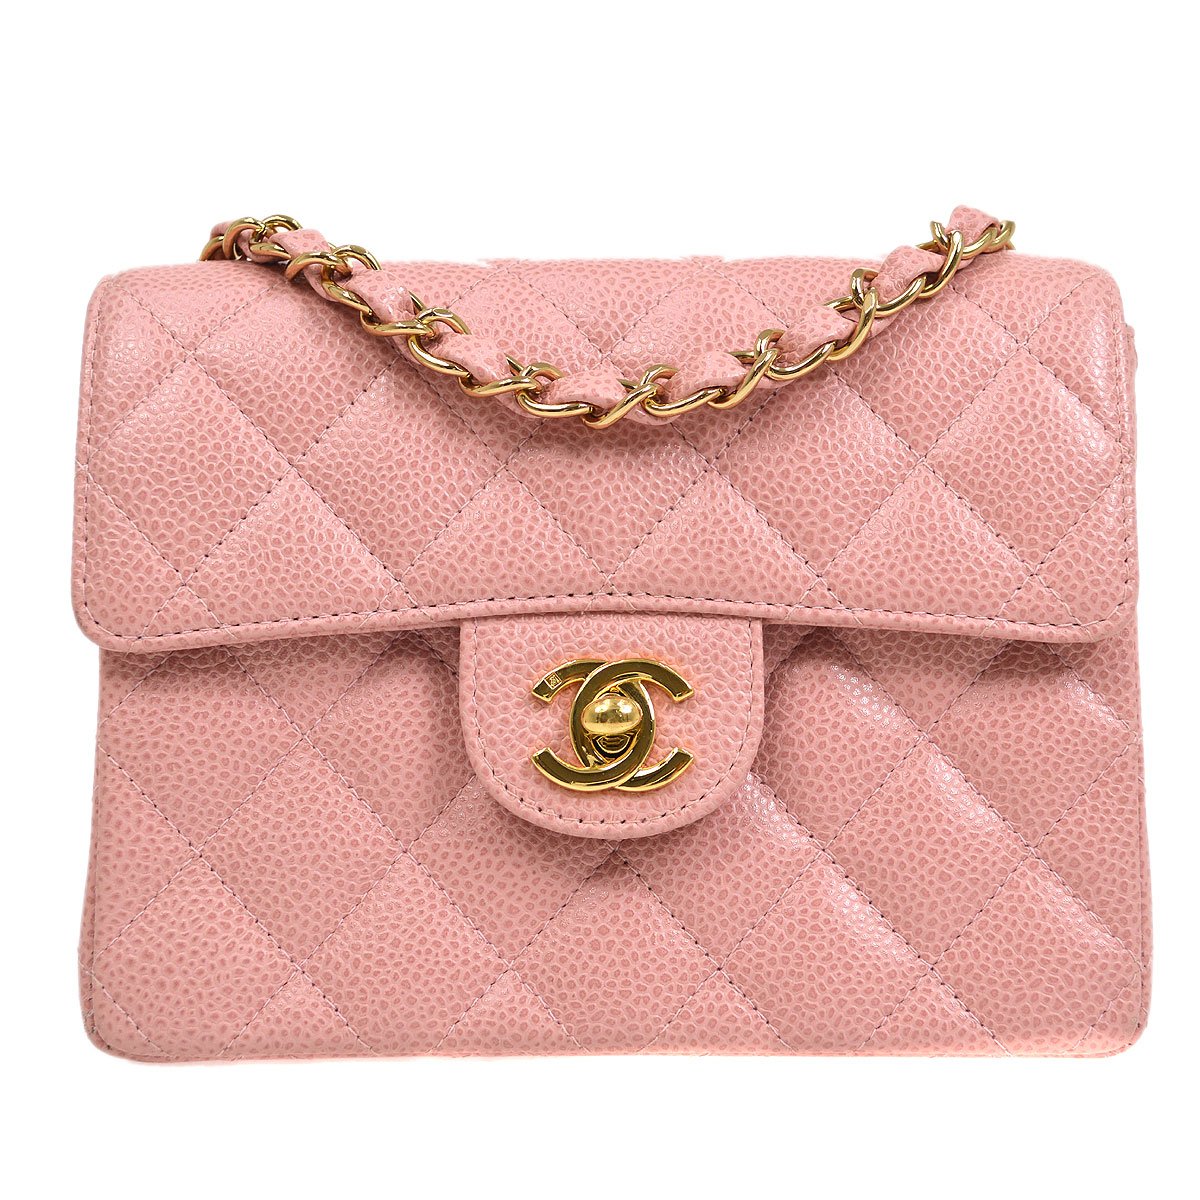 Vintage Chanel Medium Classic Double Flap Bag Pink Tweed Silver